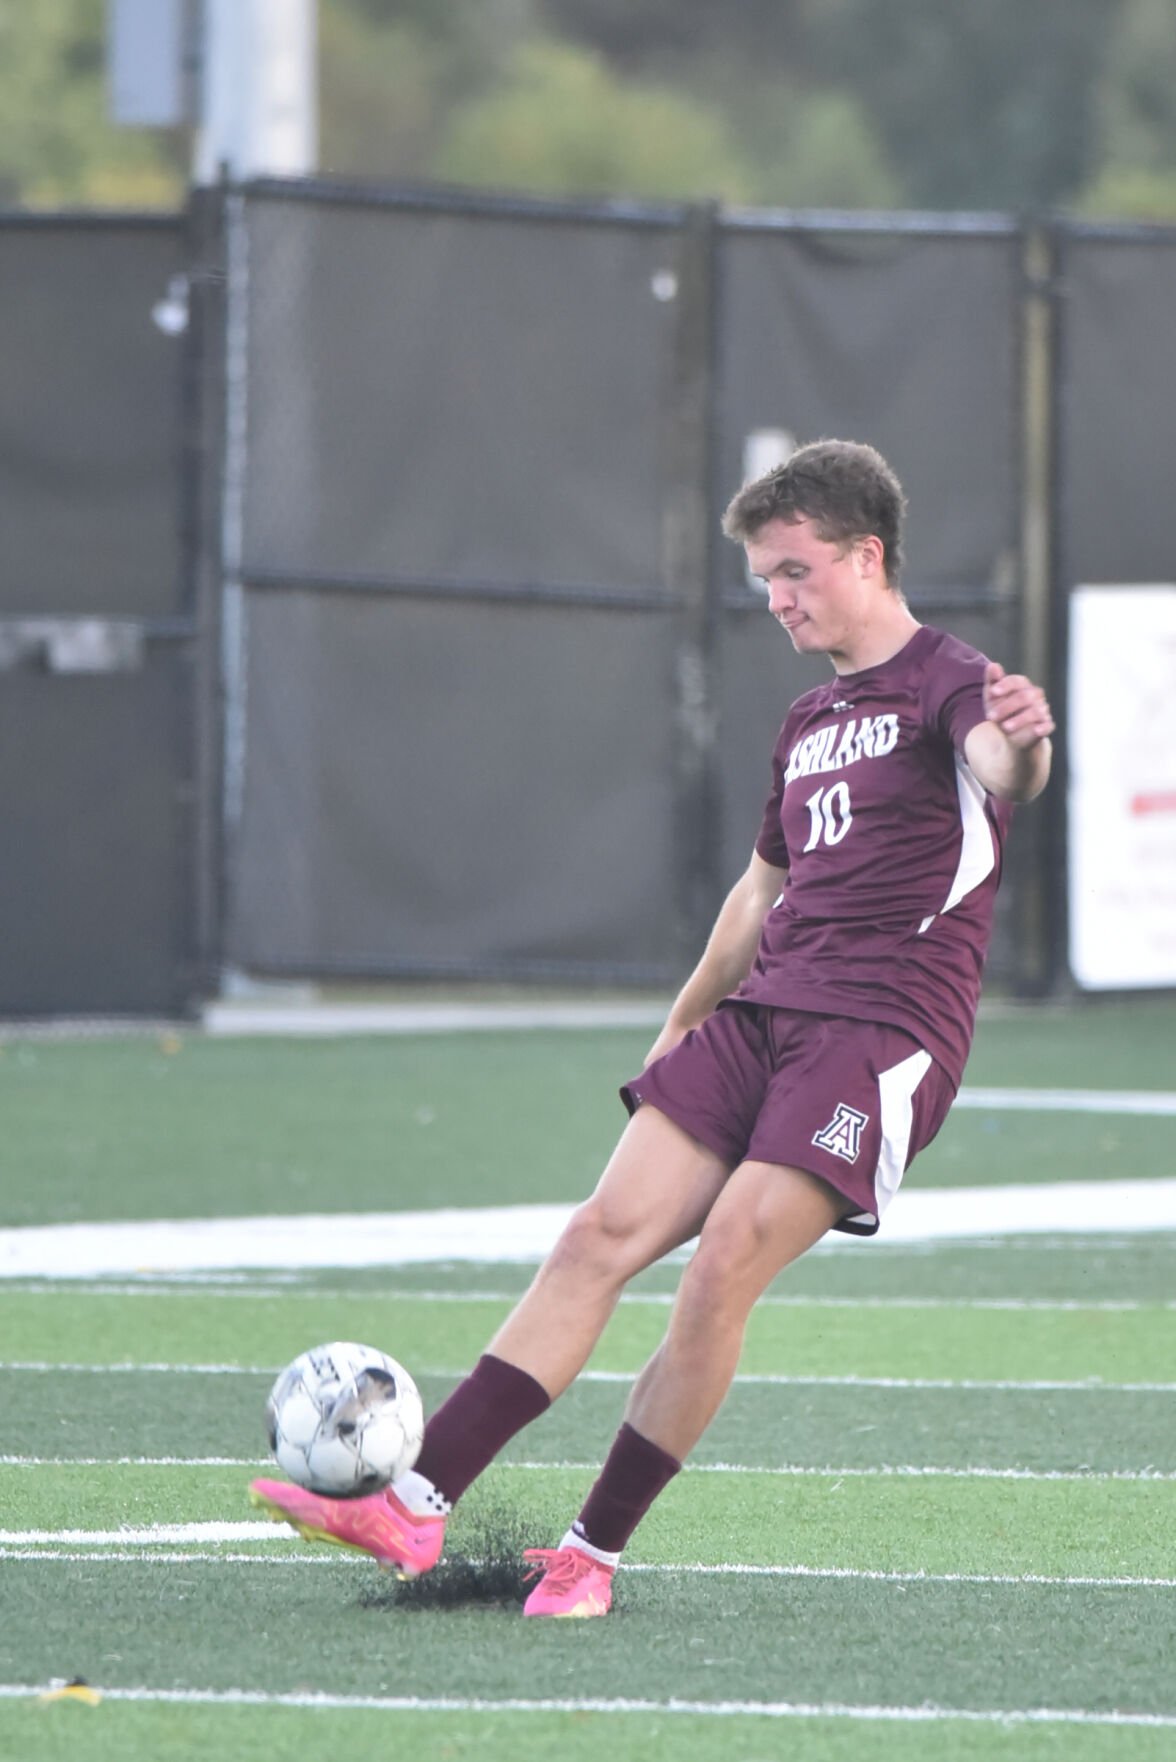 Nick Parker’s double leads Tomcats to 2-0 win over Boyd County in soccer match